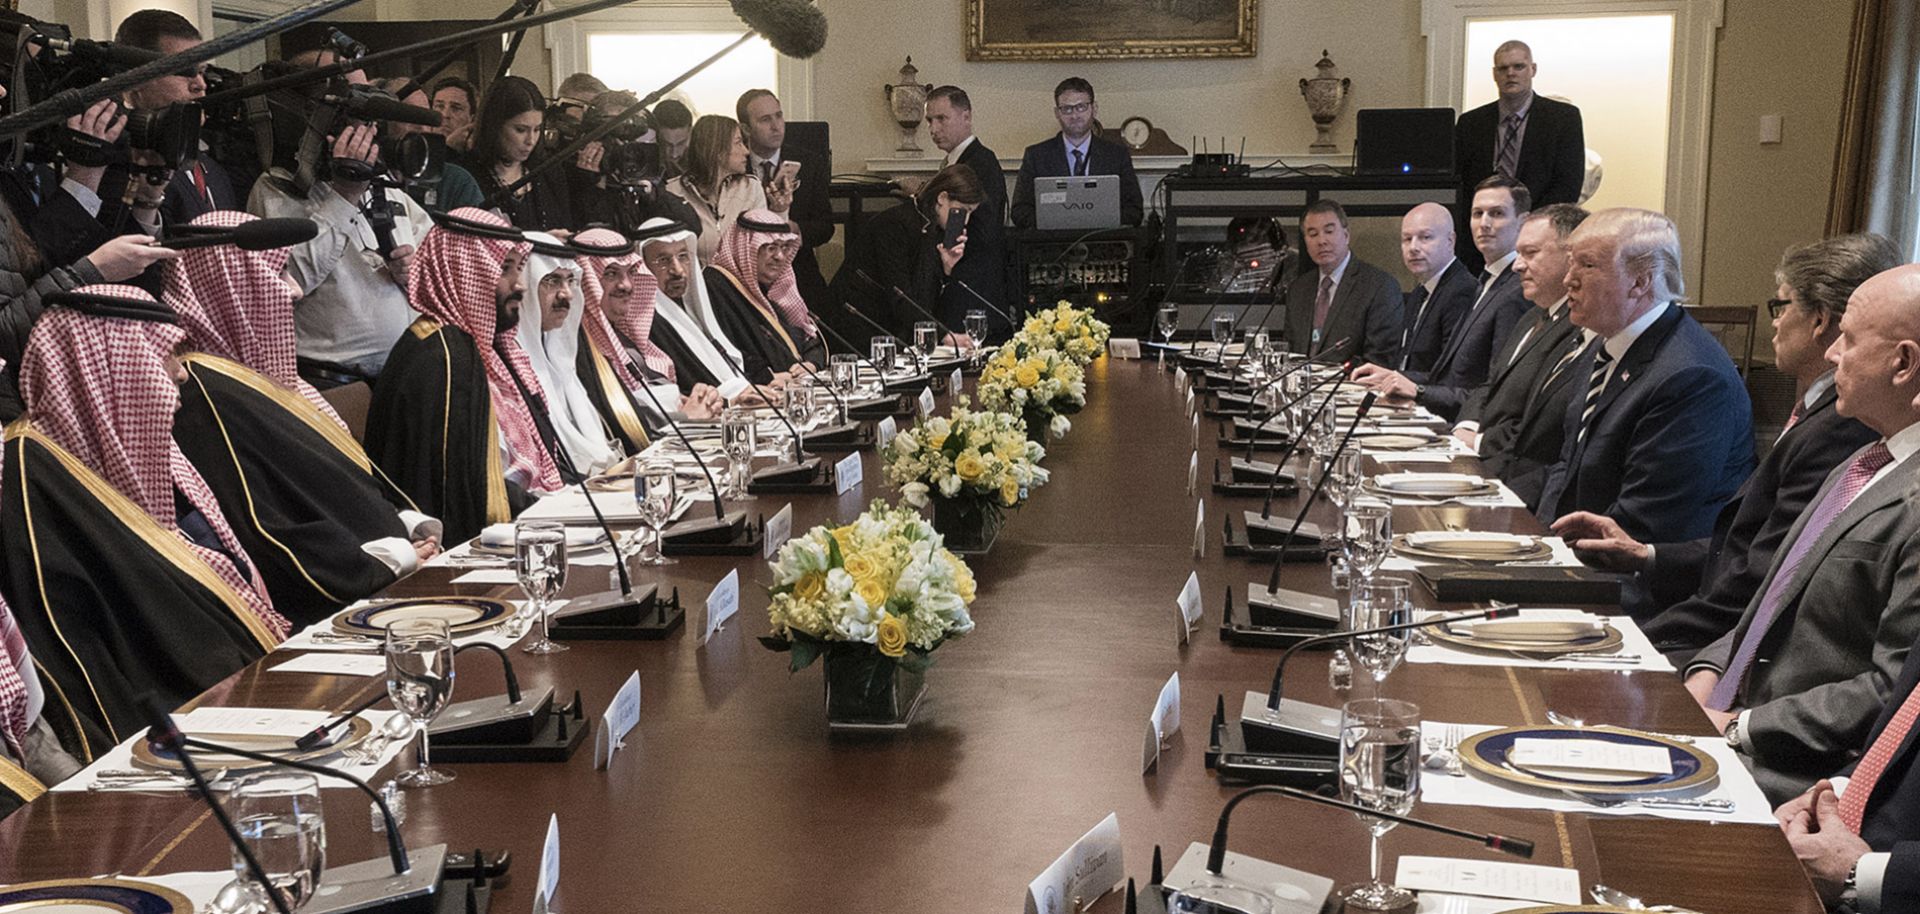 U.S. President Donald Trump leads a U.S. delegation at a working lunch with Saudi Crown Prince Mohammed bin Salman and his aides.